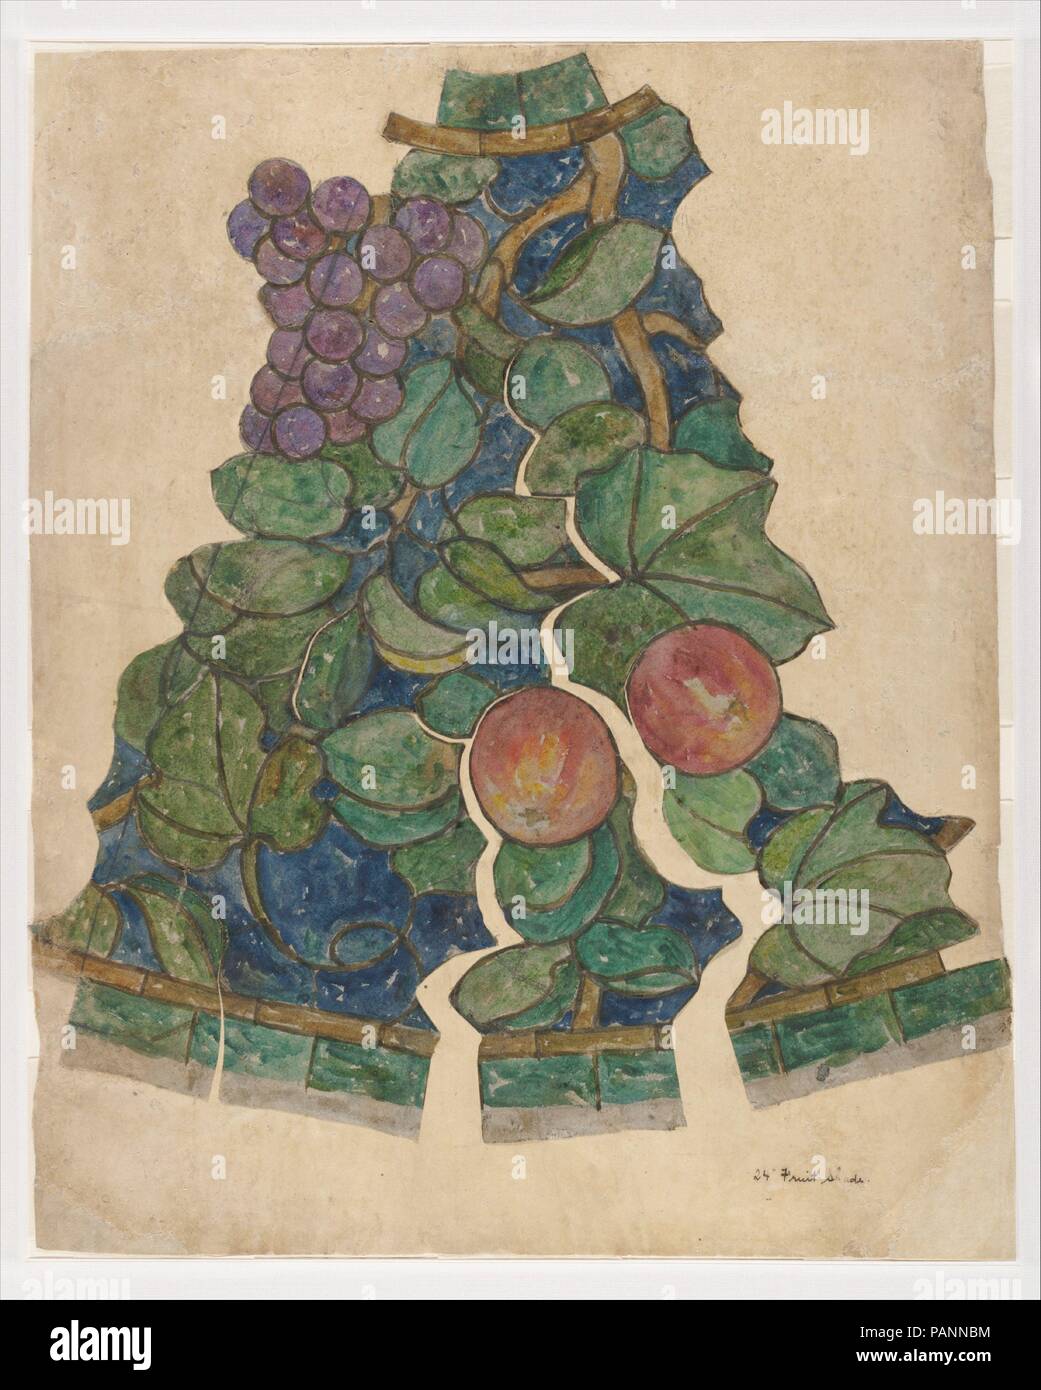 Working drawing for 'Fruit' shade. Artist: Louis Comfort Tiffany (American, New York 1848-1933 New York). Culture: American. Dimensions: 15 5/8 x 12 5/8 in.  (39.7 x 32.1 cm). Maker: Possibly Tiffany Glass and Decorating Company (American, 1892-1902); Possibly Tiffany Studios (1902-32). Date: 1900-1915.  This drawing is the only work in this installation with a linen rather than paper support, suggesting that it was actively used in the lampshade production process as a template for assembling the 'Fruit' shade. Like the drawing of the 'Snowball' shade (67.654.468), it is a watercolor study fo Stock Photo